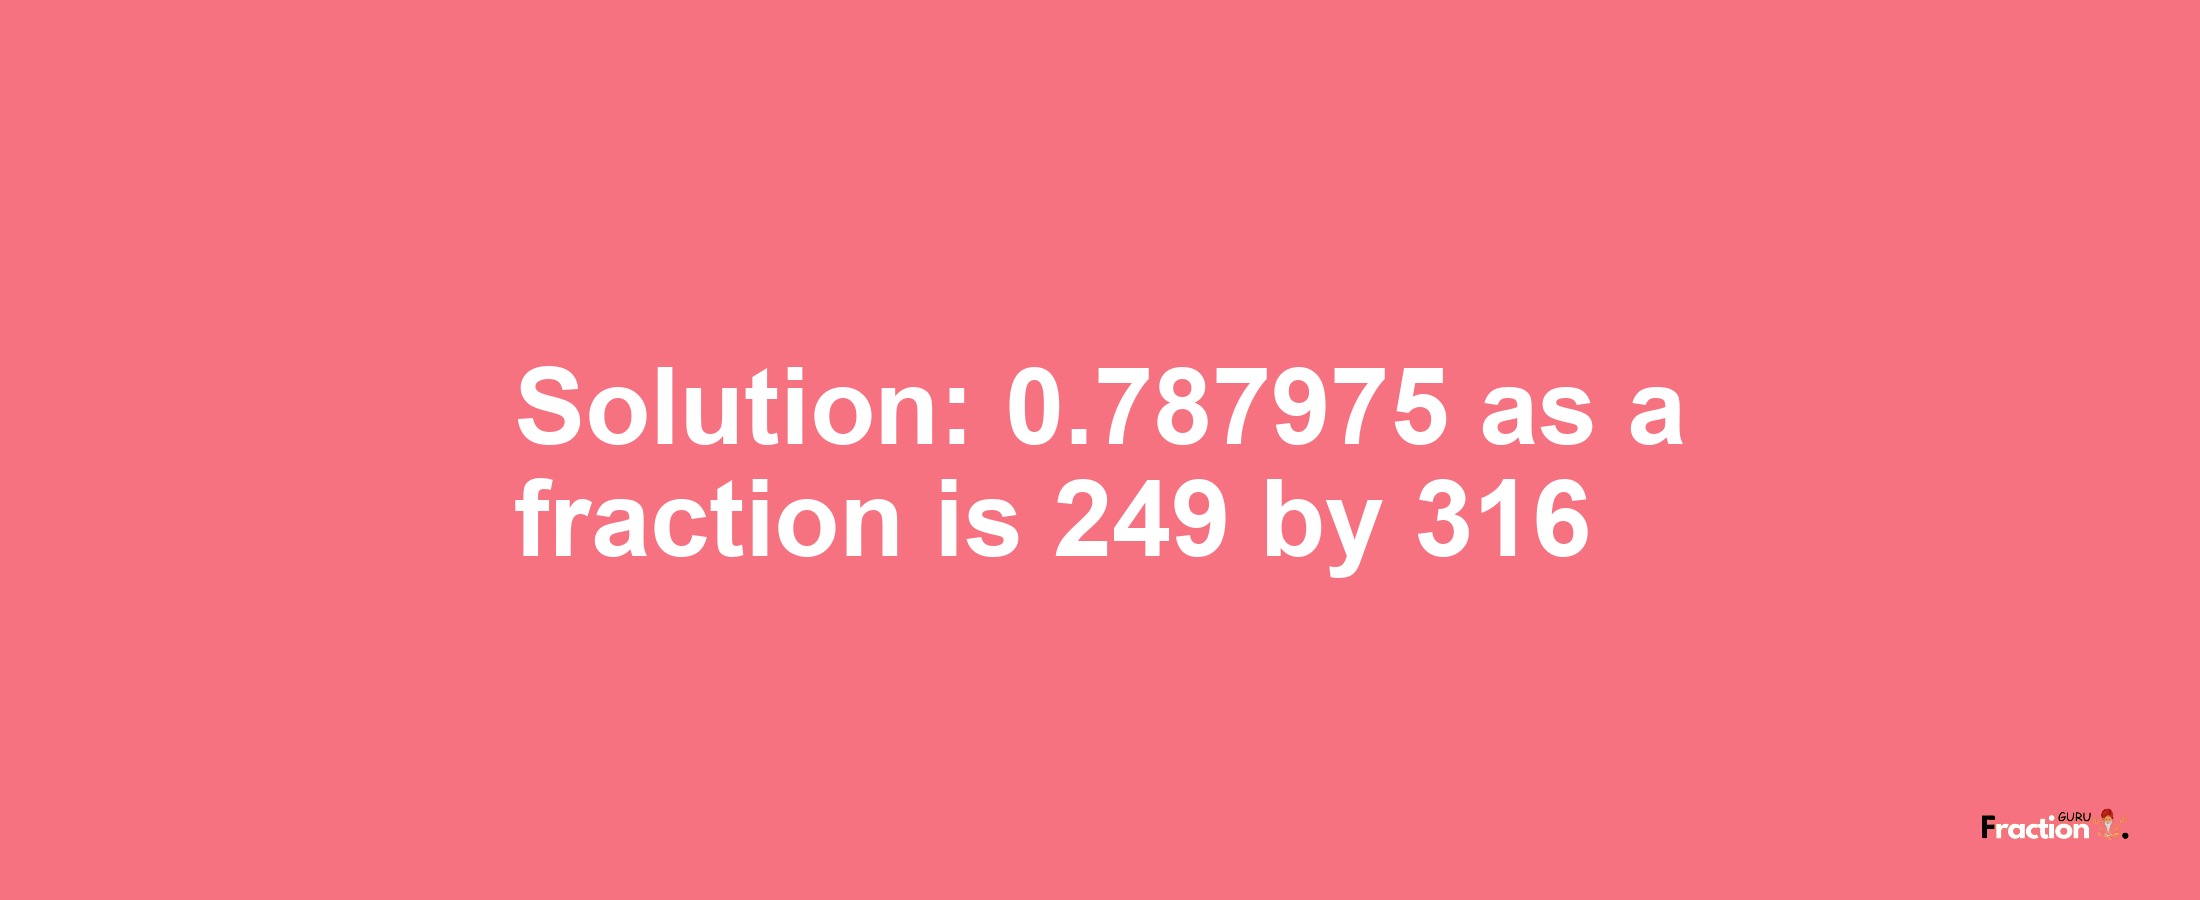 Solution:0.787975 as a fraction is 249/316